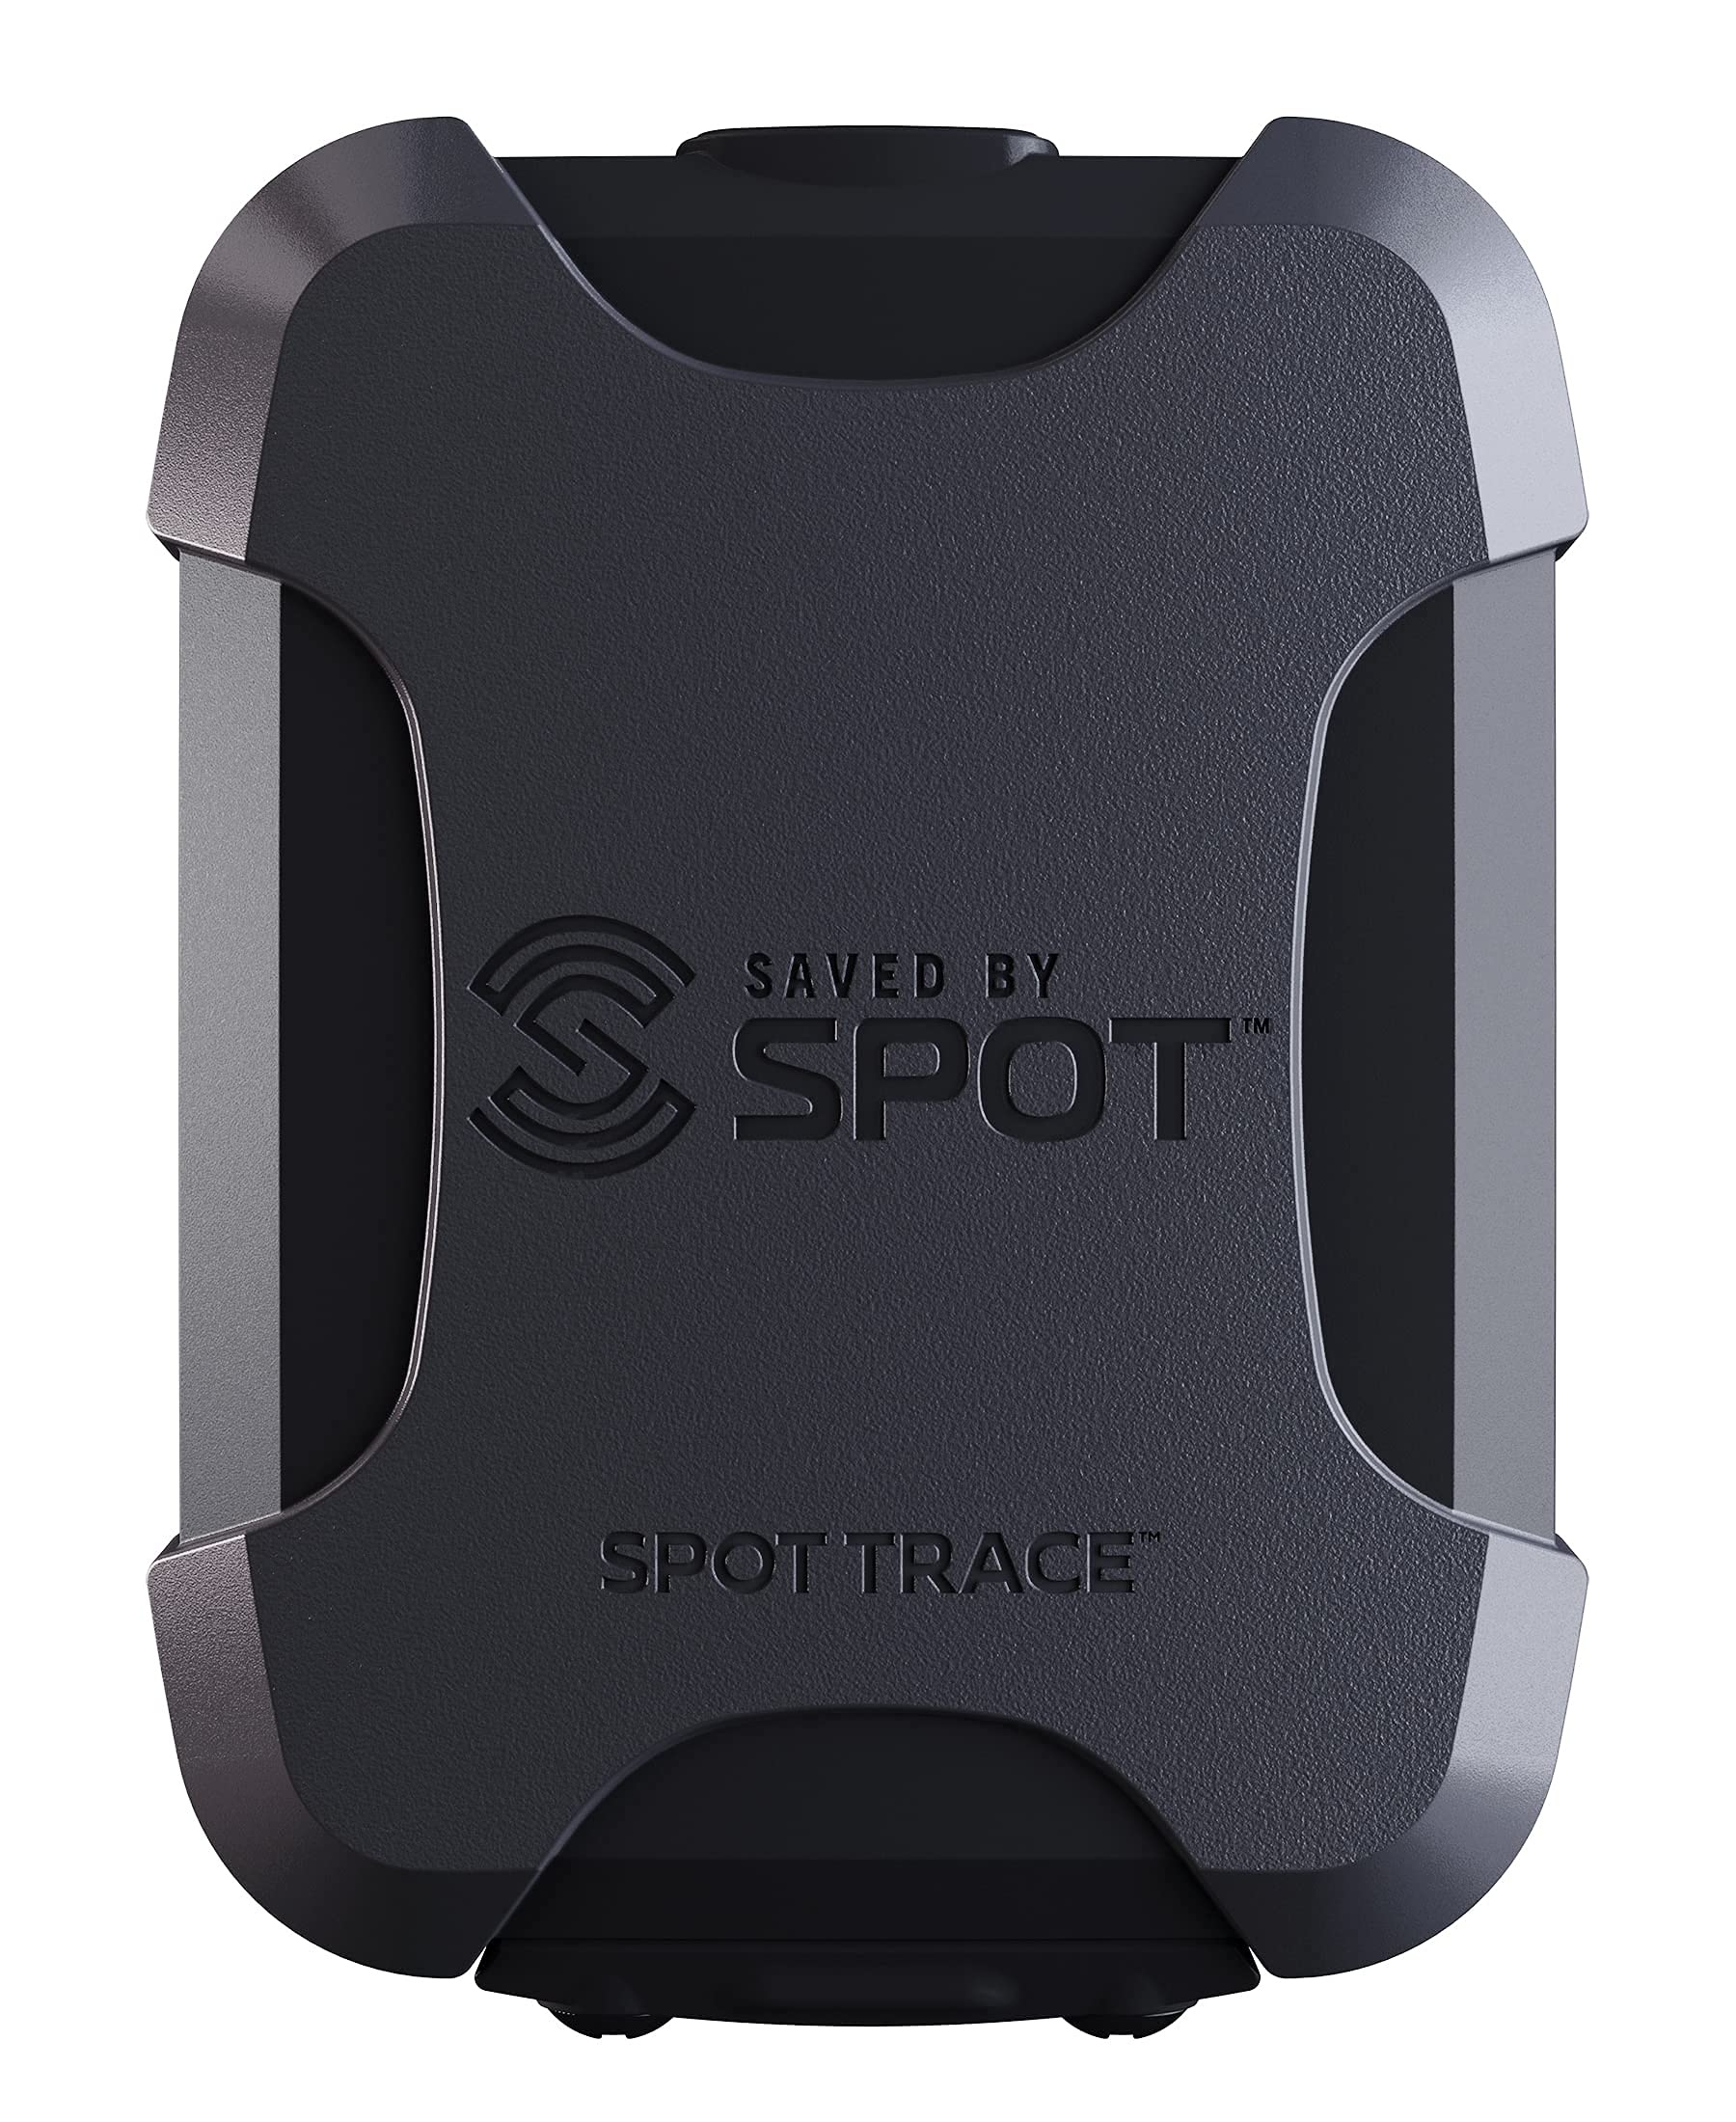 Spot Trace Satellite Tracking Device | Handheld Satellite Tracker for Hiking, Camping, Cars, Kids, Outdoor Activities, and Assets with Globalstar Satellite Network Coverage | Subscription Applicable